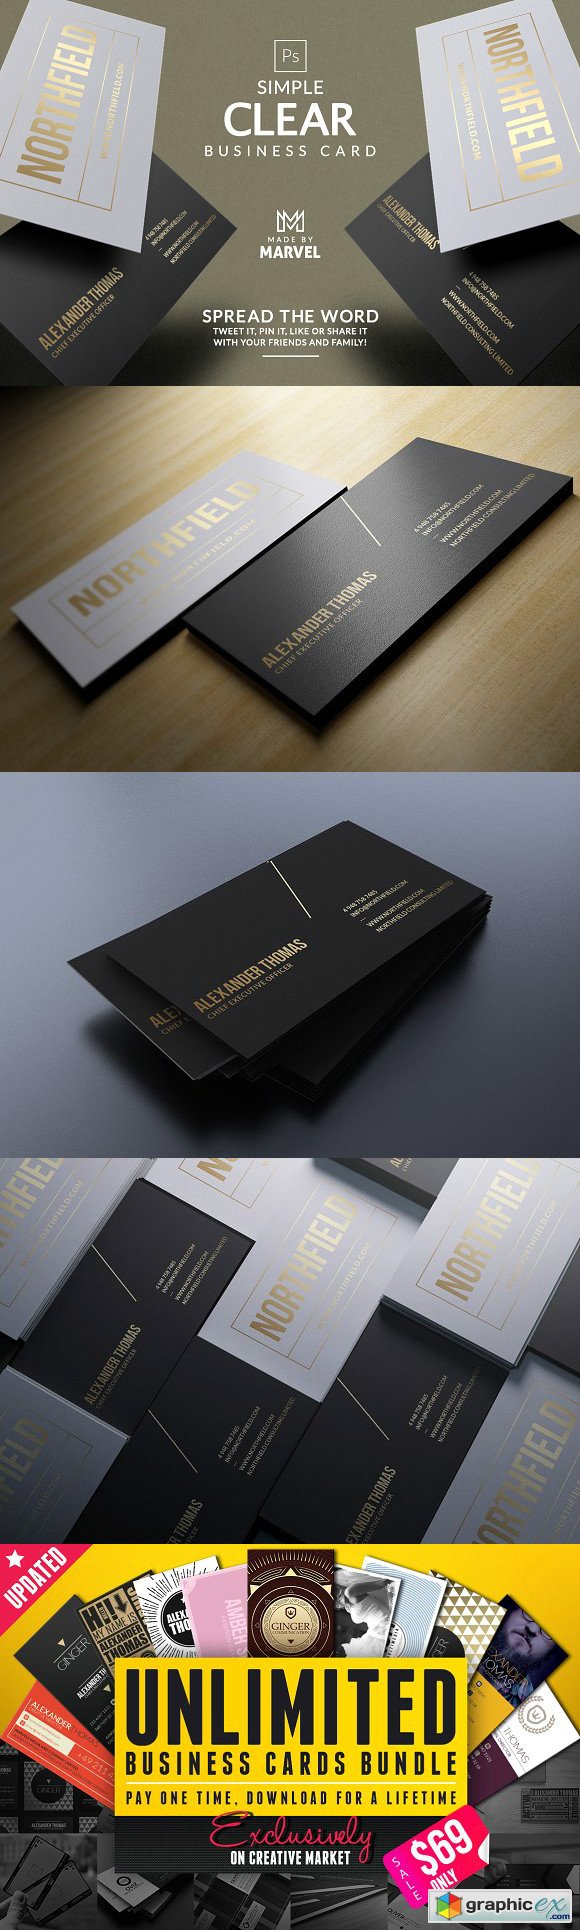 Simple Clear Business Card